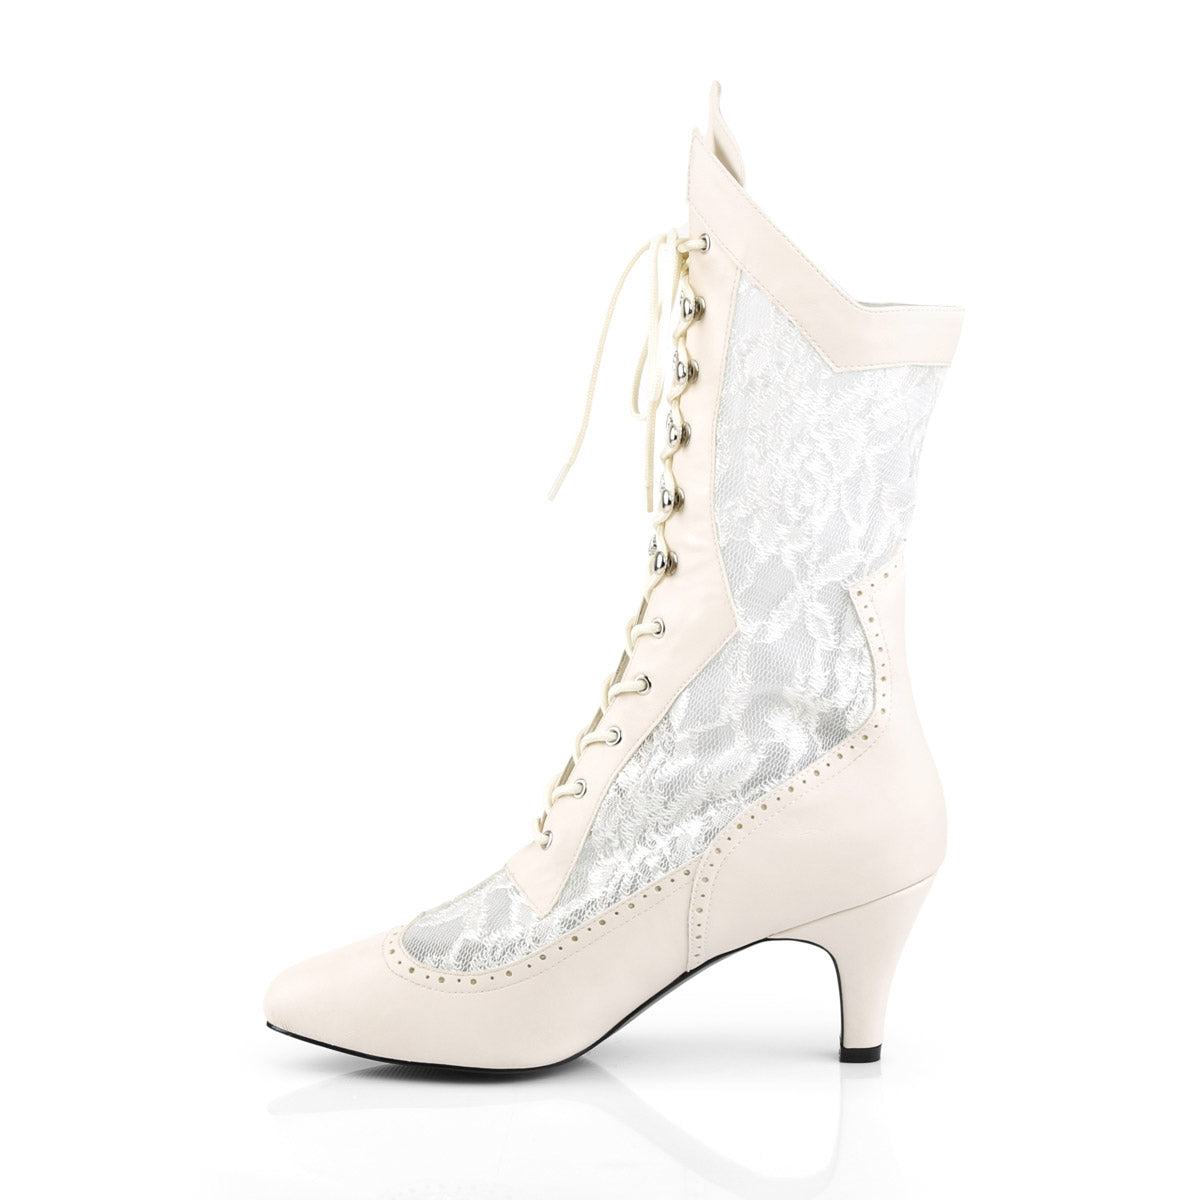 3" Heel Wide Width/Shaft, Calf High Boot Ivory Faux Leather-Satin Lace Pleaser Pink Label DIVINE/1050